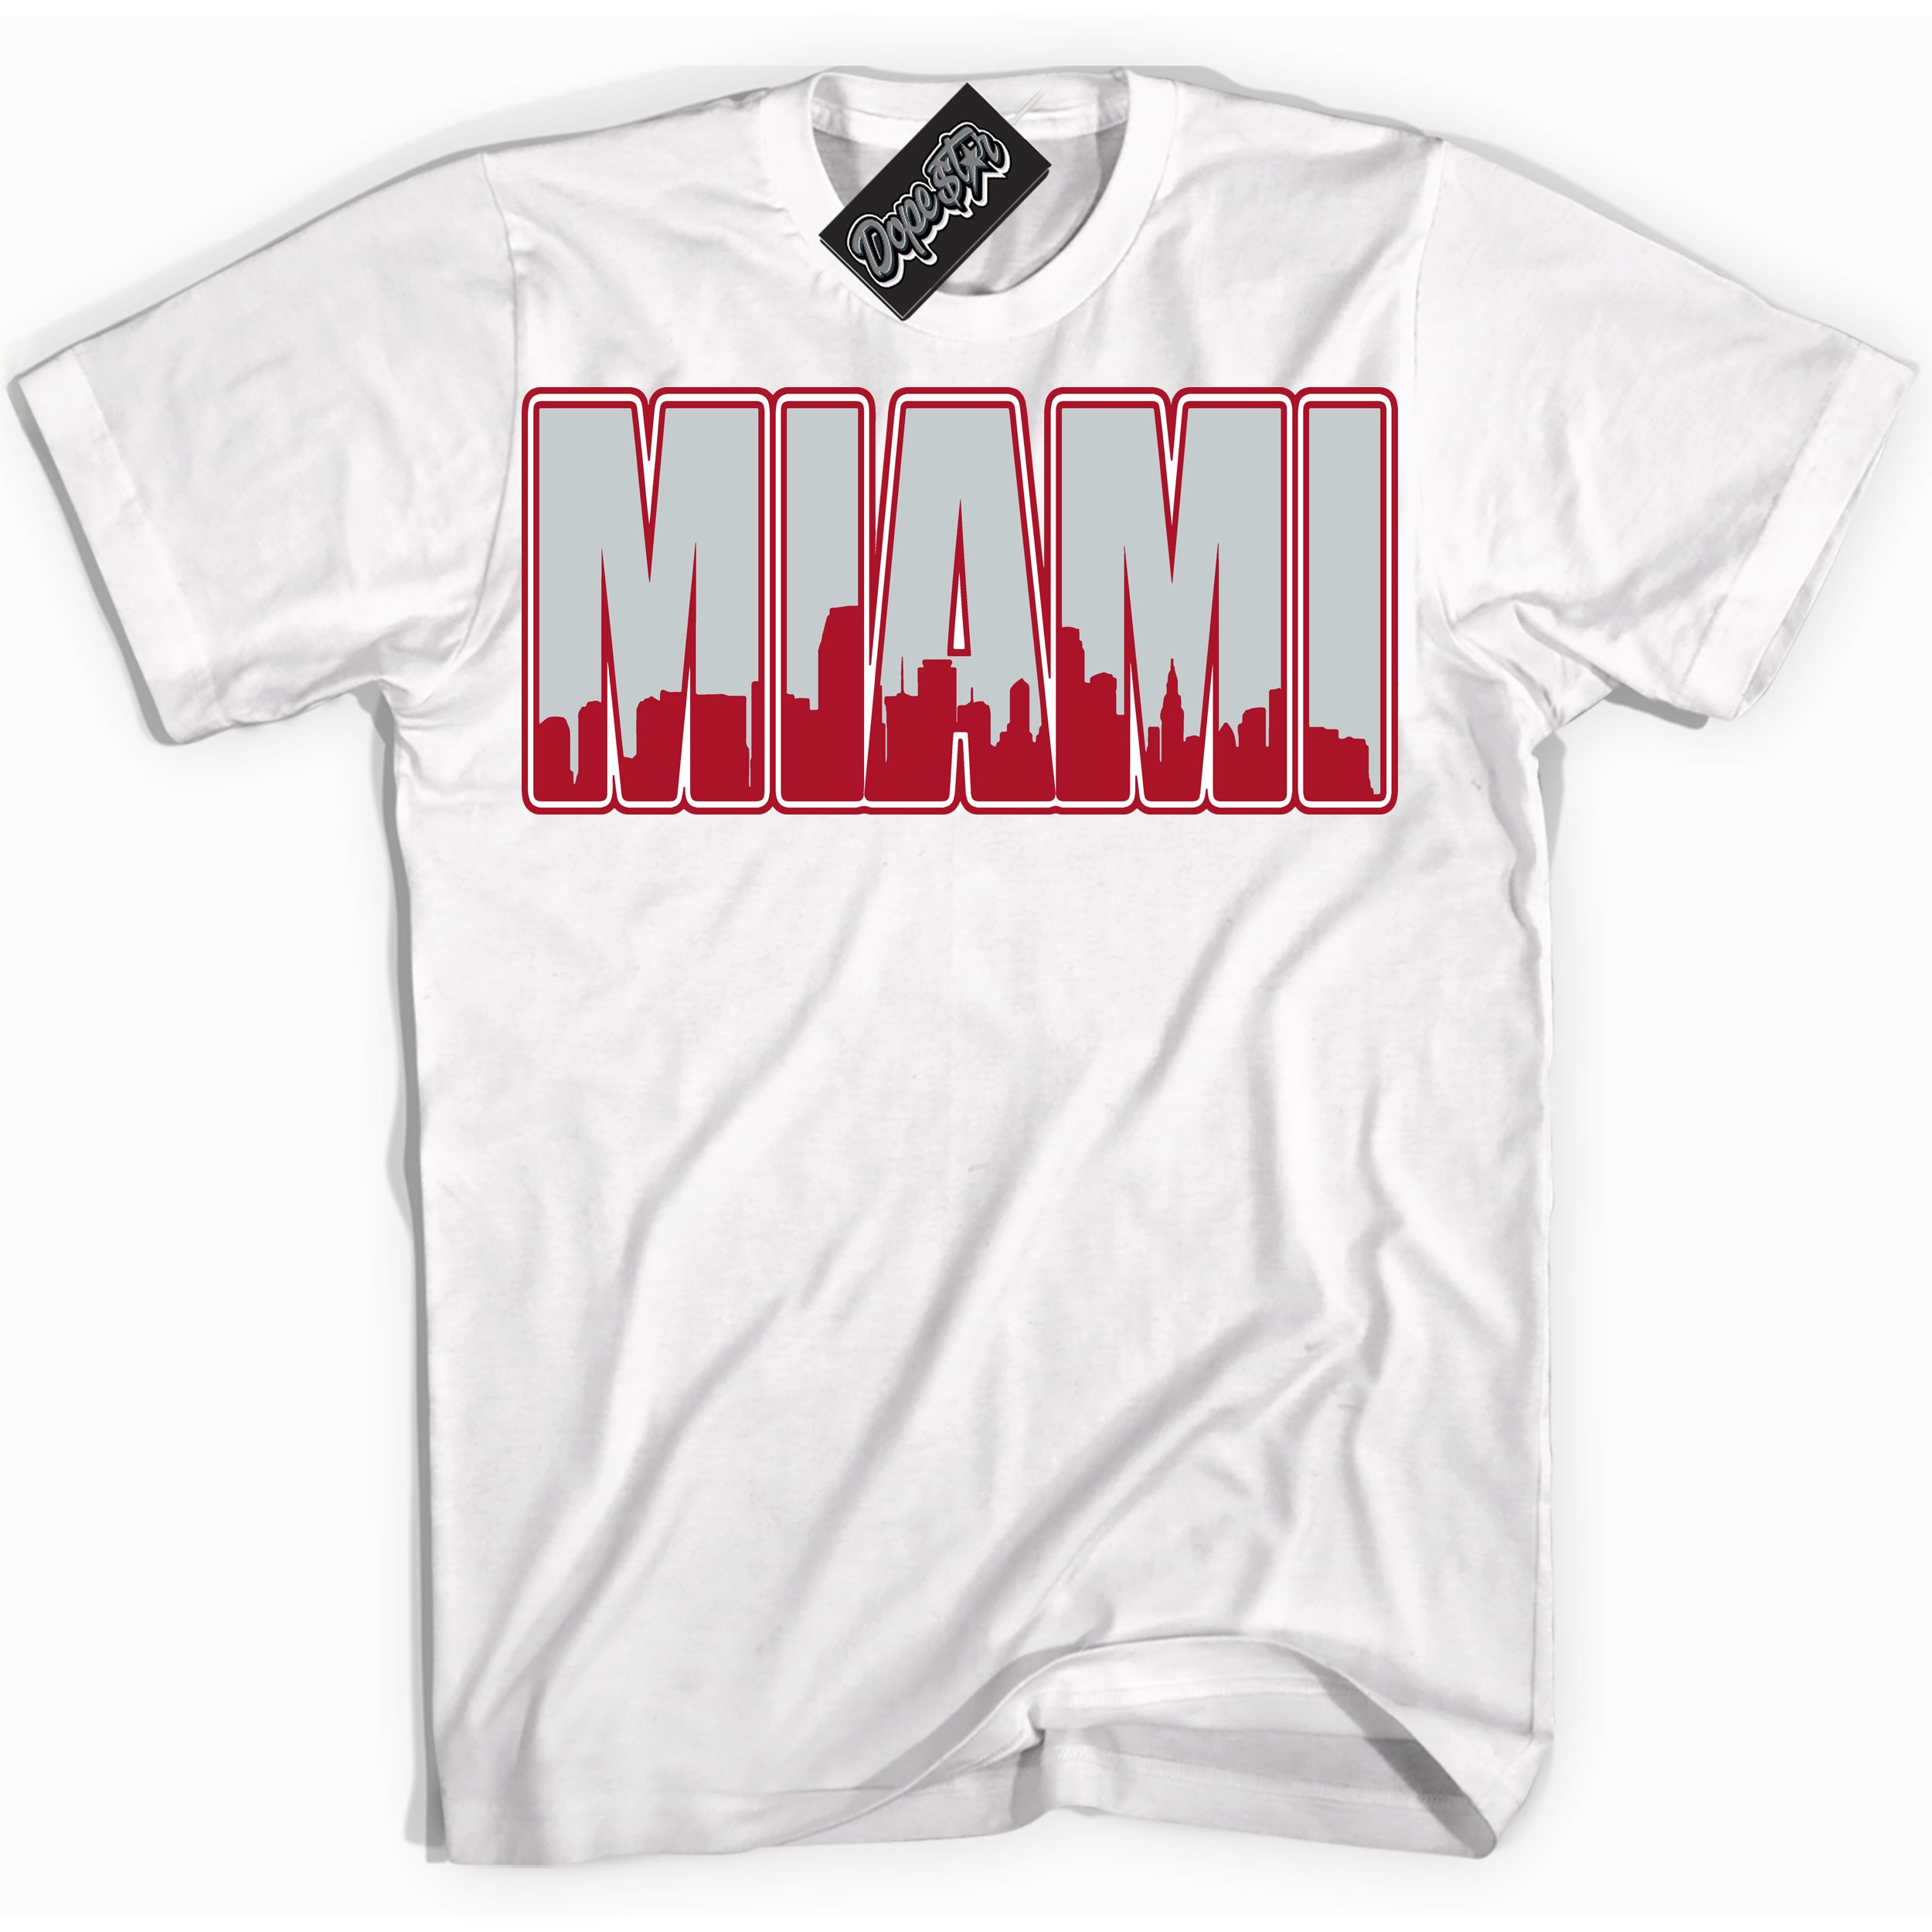 Cool White Shirt with “ Miami” design that perfectly matches Reverse Ultraman Sneakers.